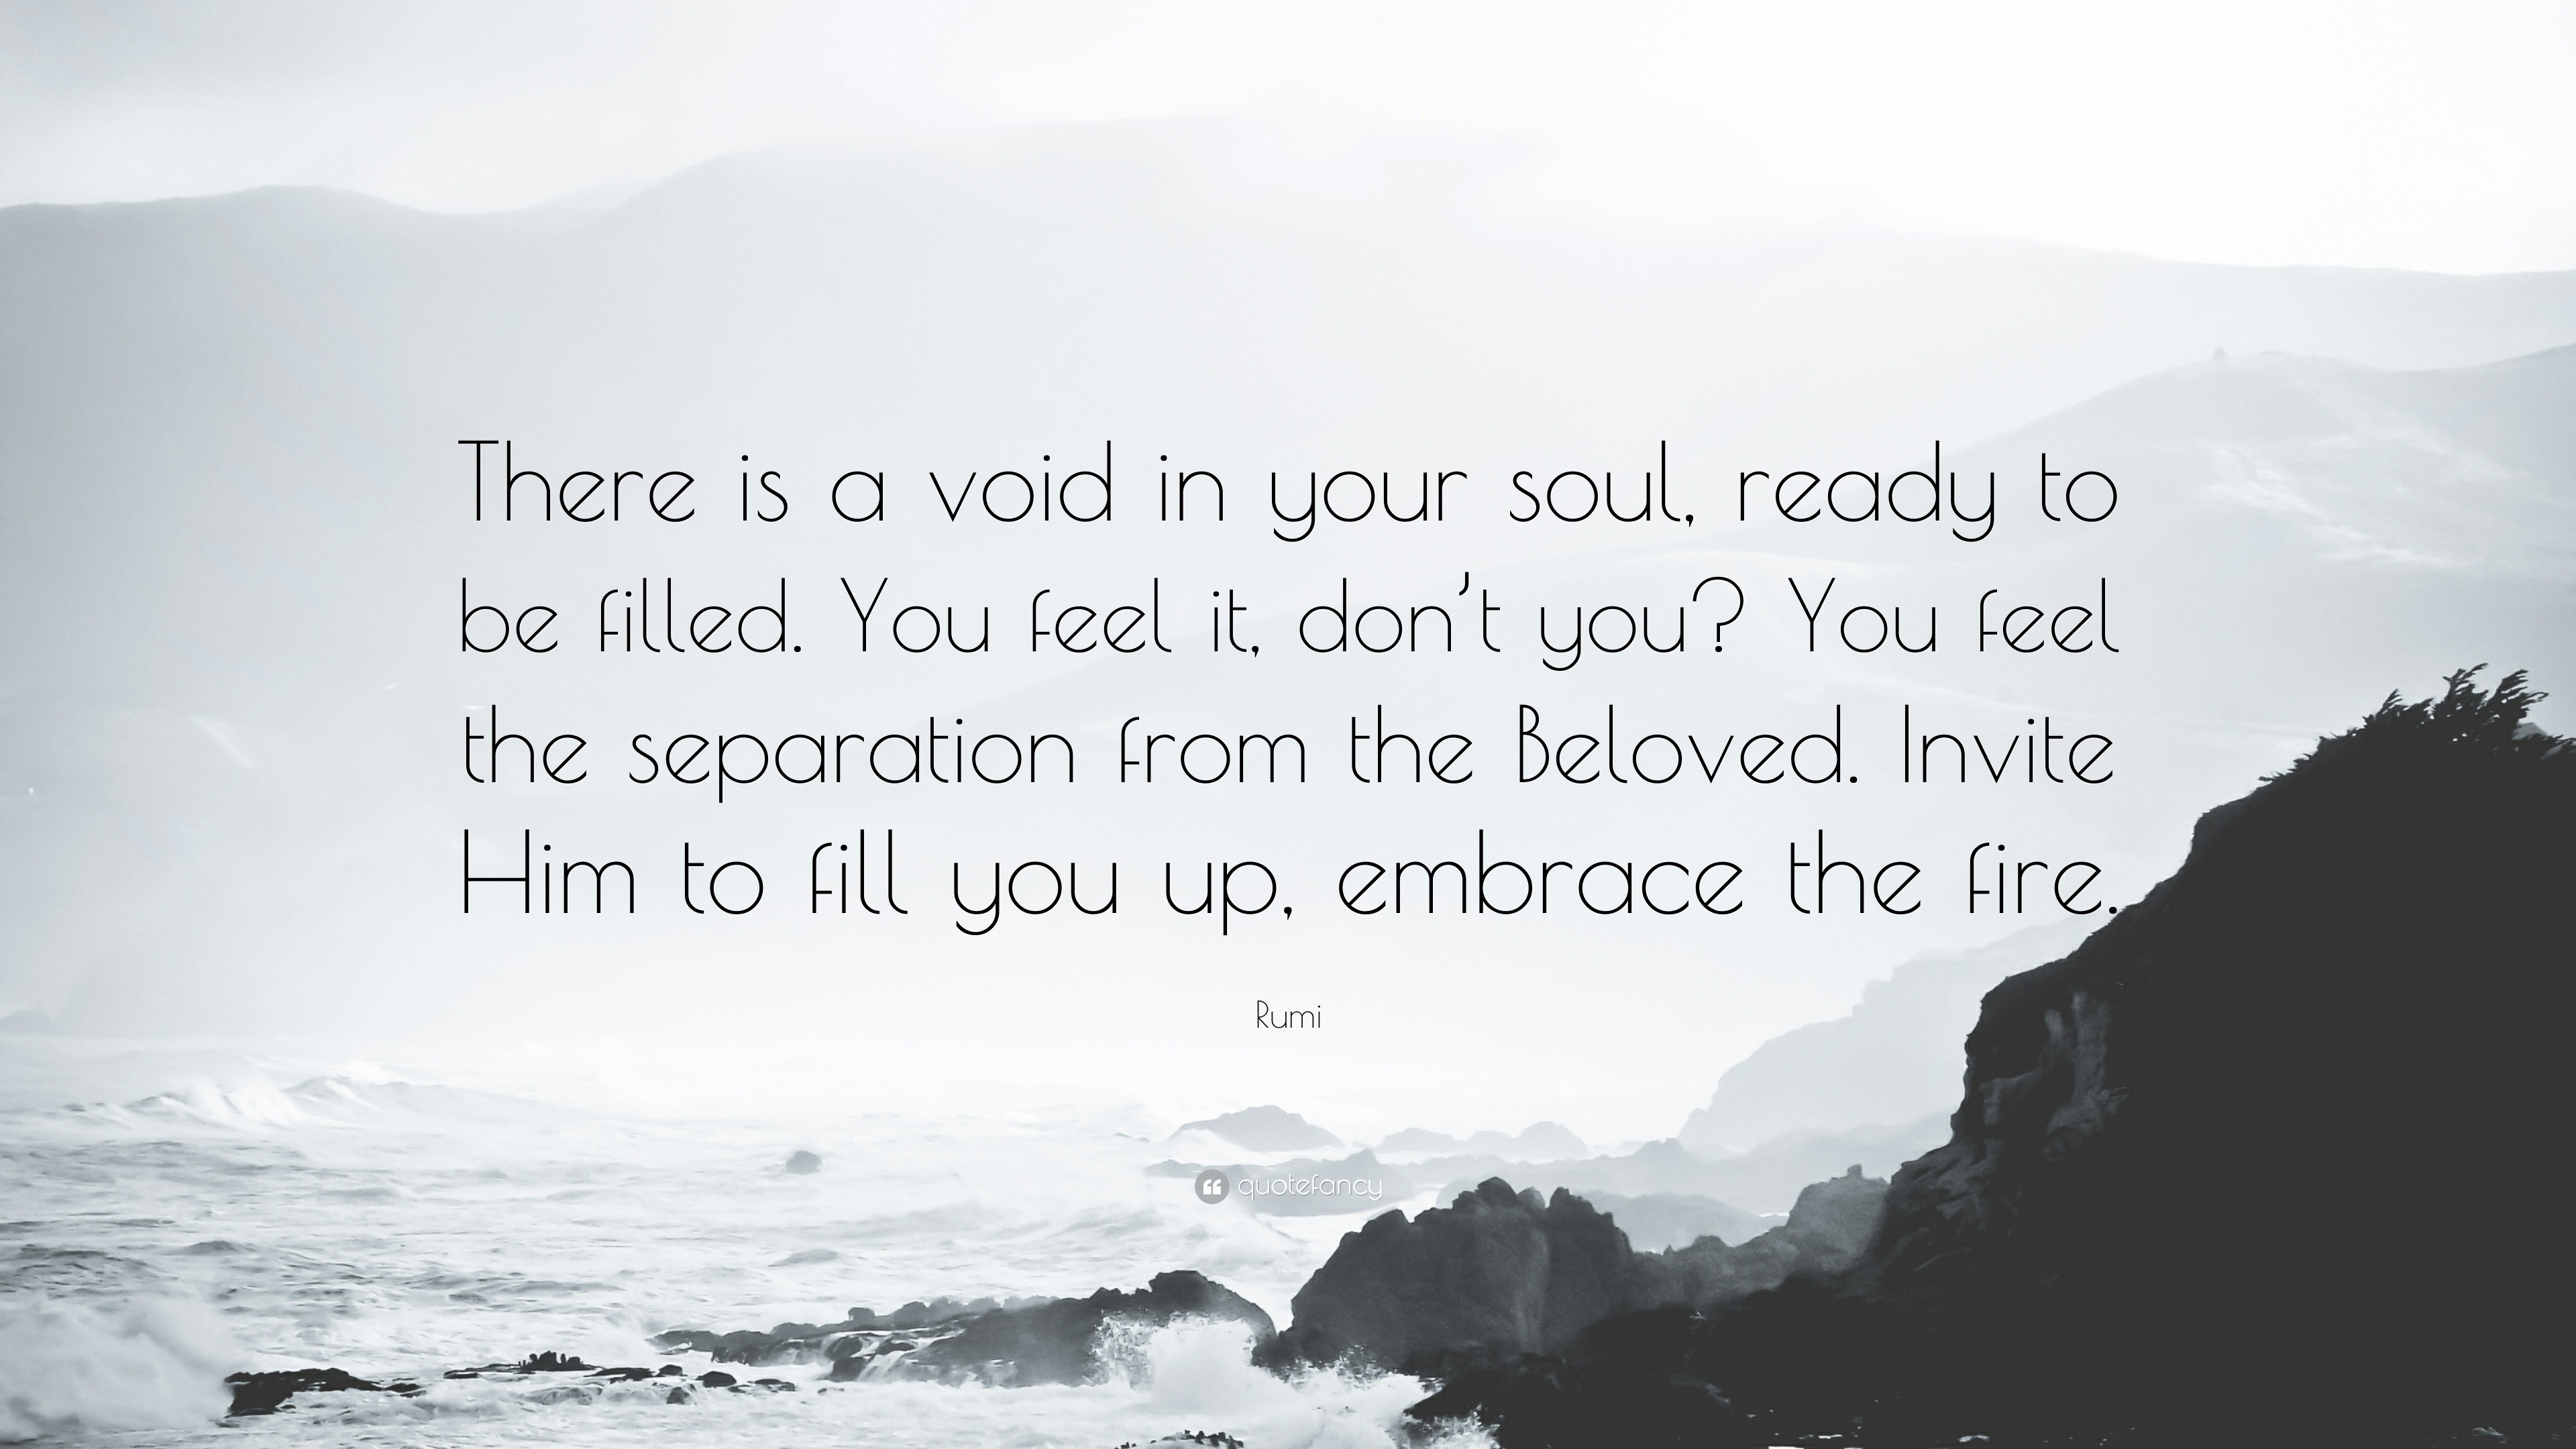 Rumi Quote: “There is a void in your soul, ready to be filled. You